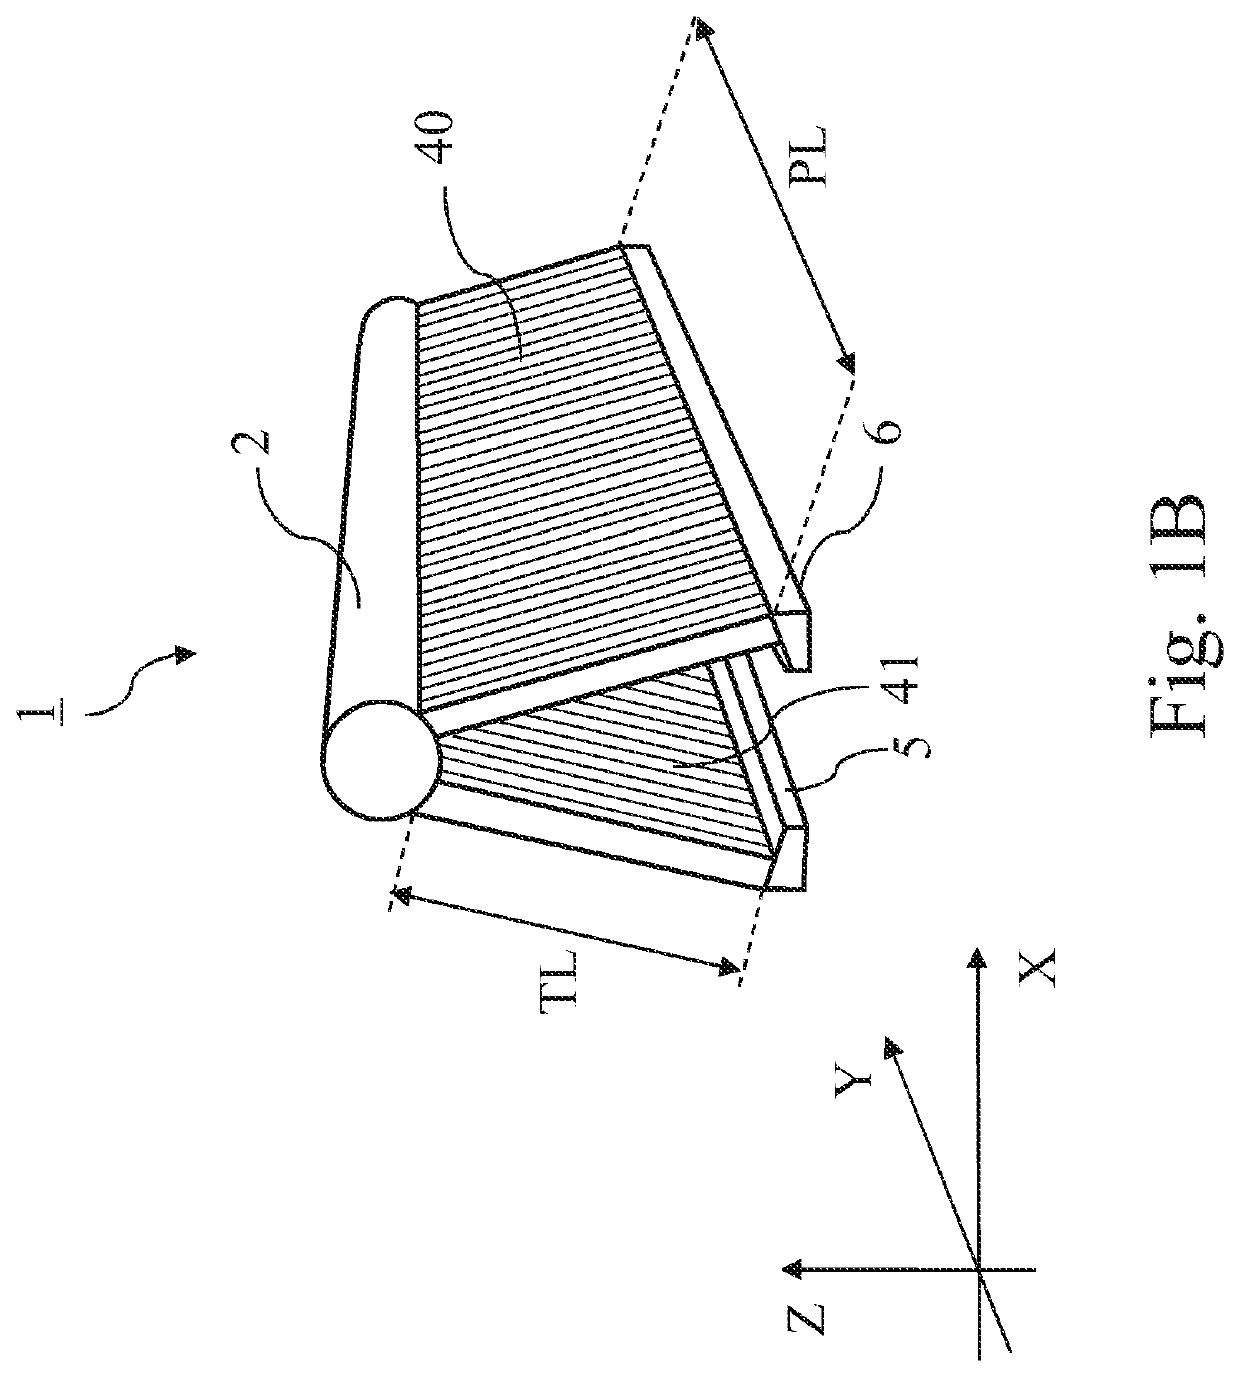 Air-cooled condenser apparatus and method